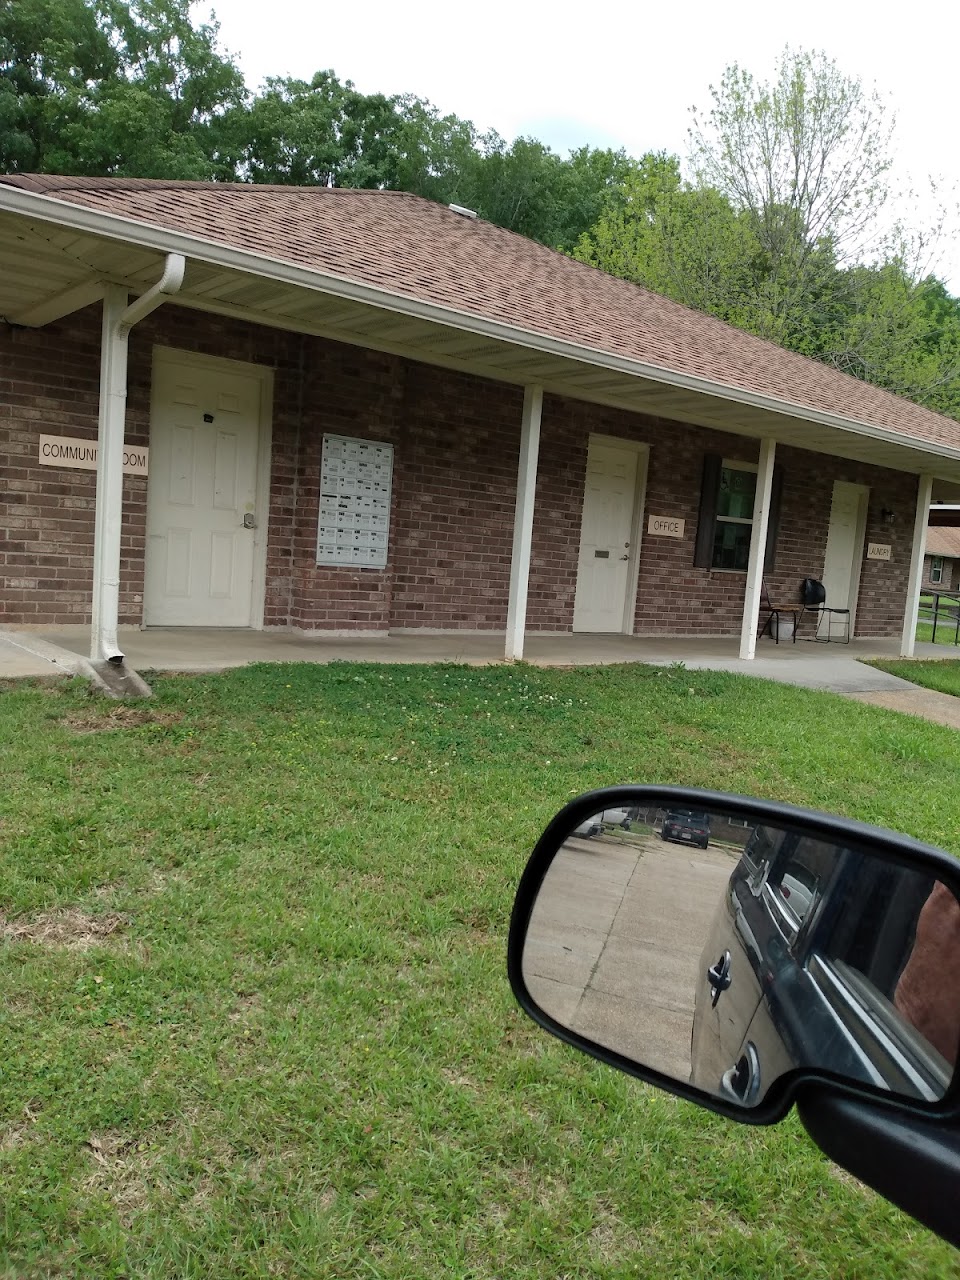 Photo of FAIRVIEW MANOR. Affordable housing located at 430 PARK ST WIGGINS, MS 39577